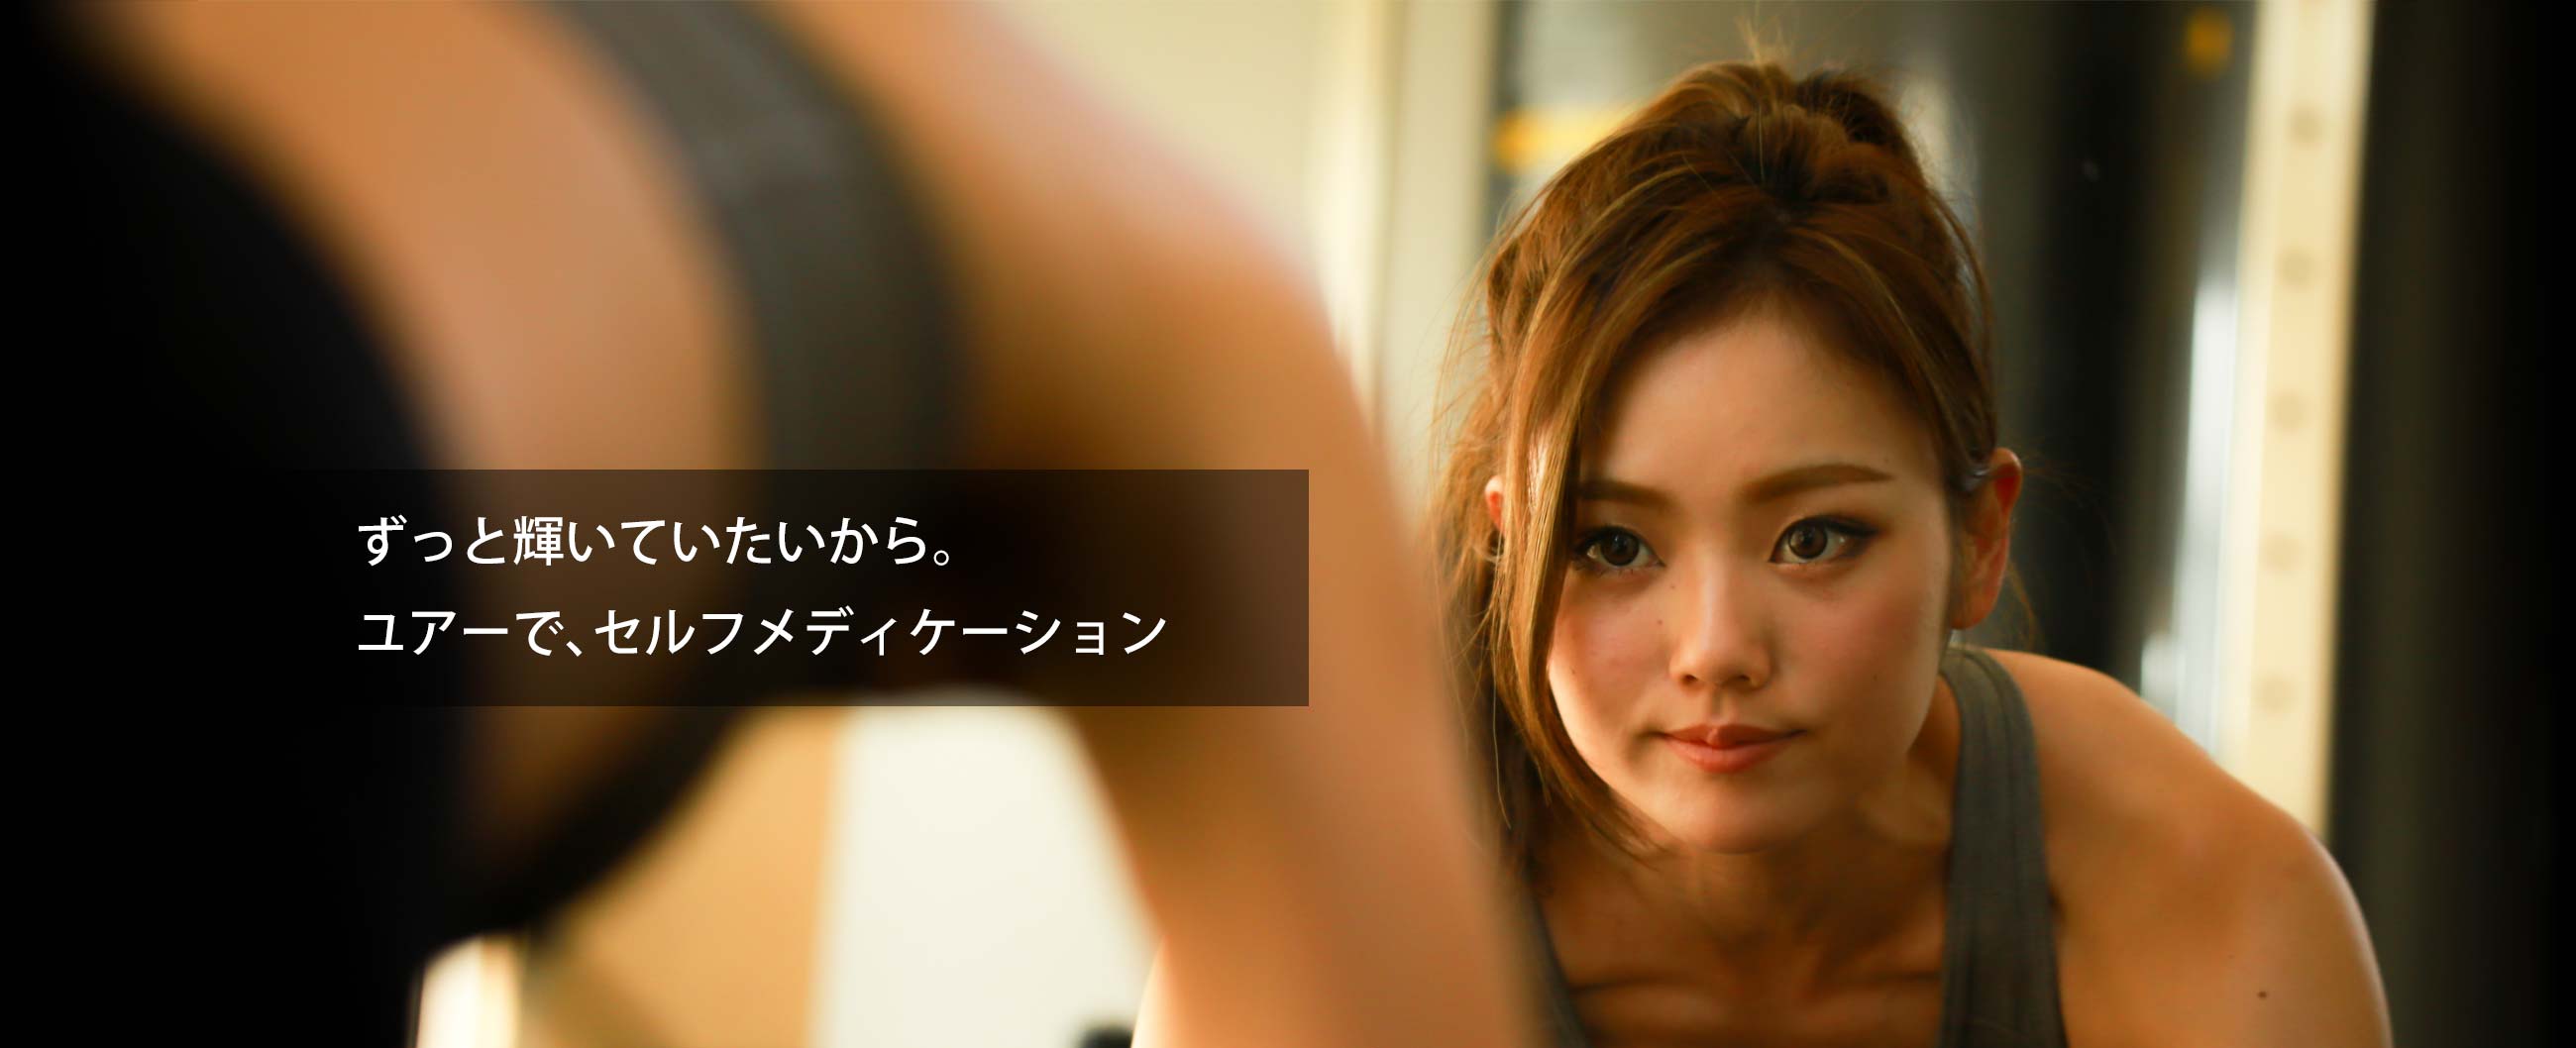 Beauty&Fitness YOURの画像